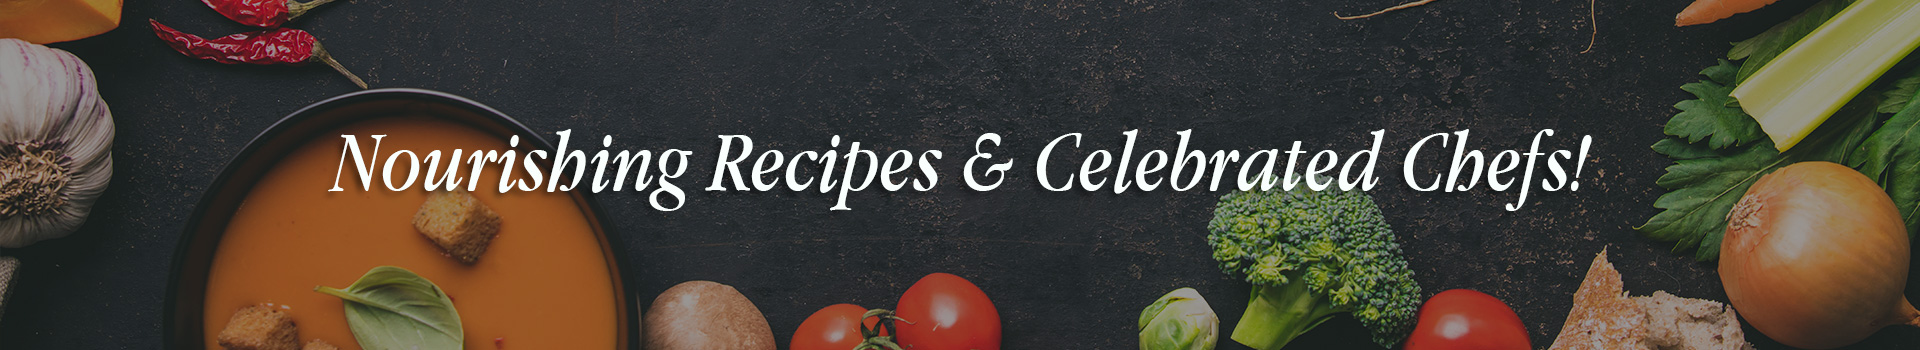 Nourishing Recipes and Celebrated Chef